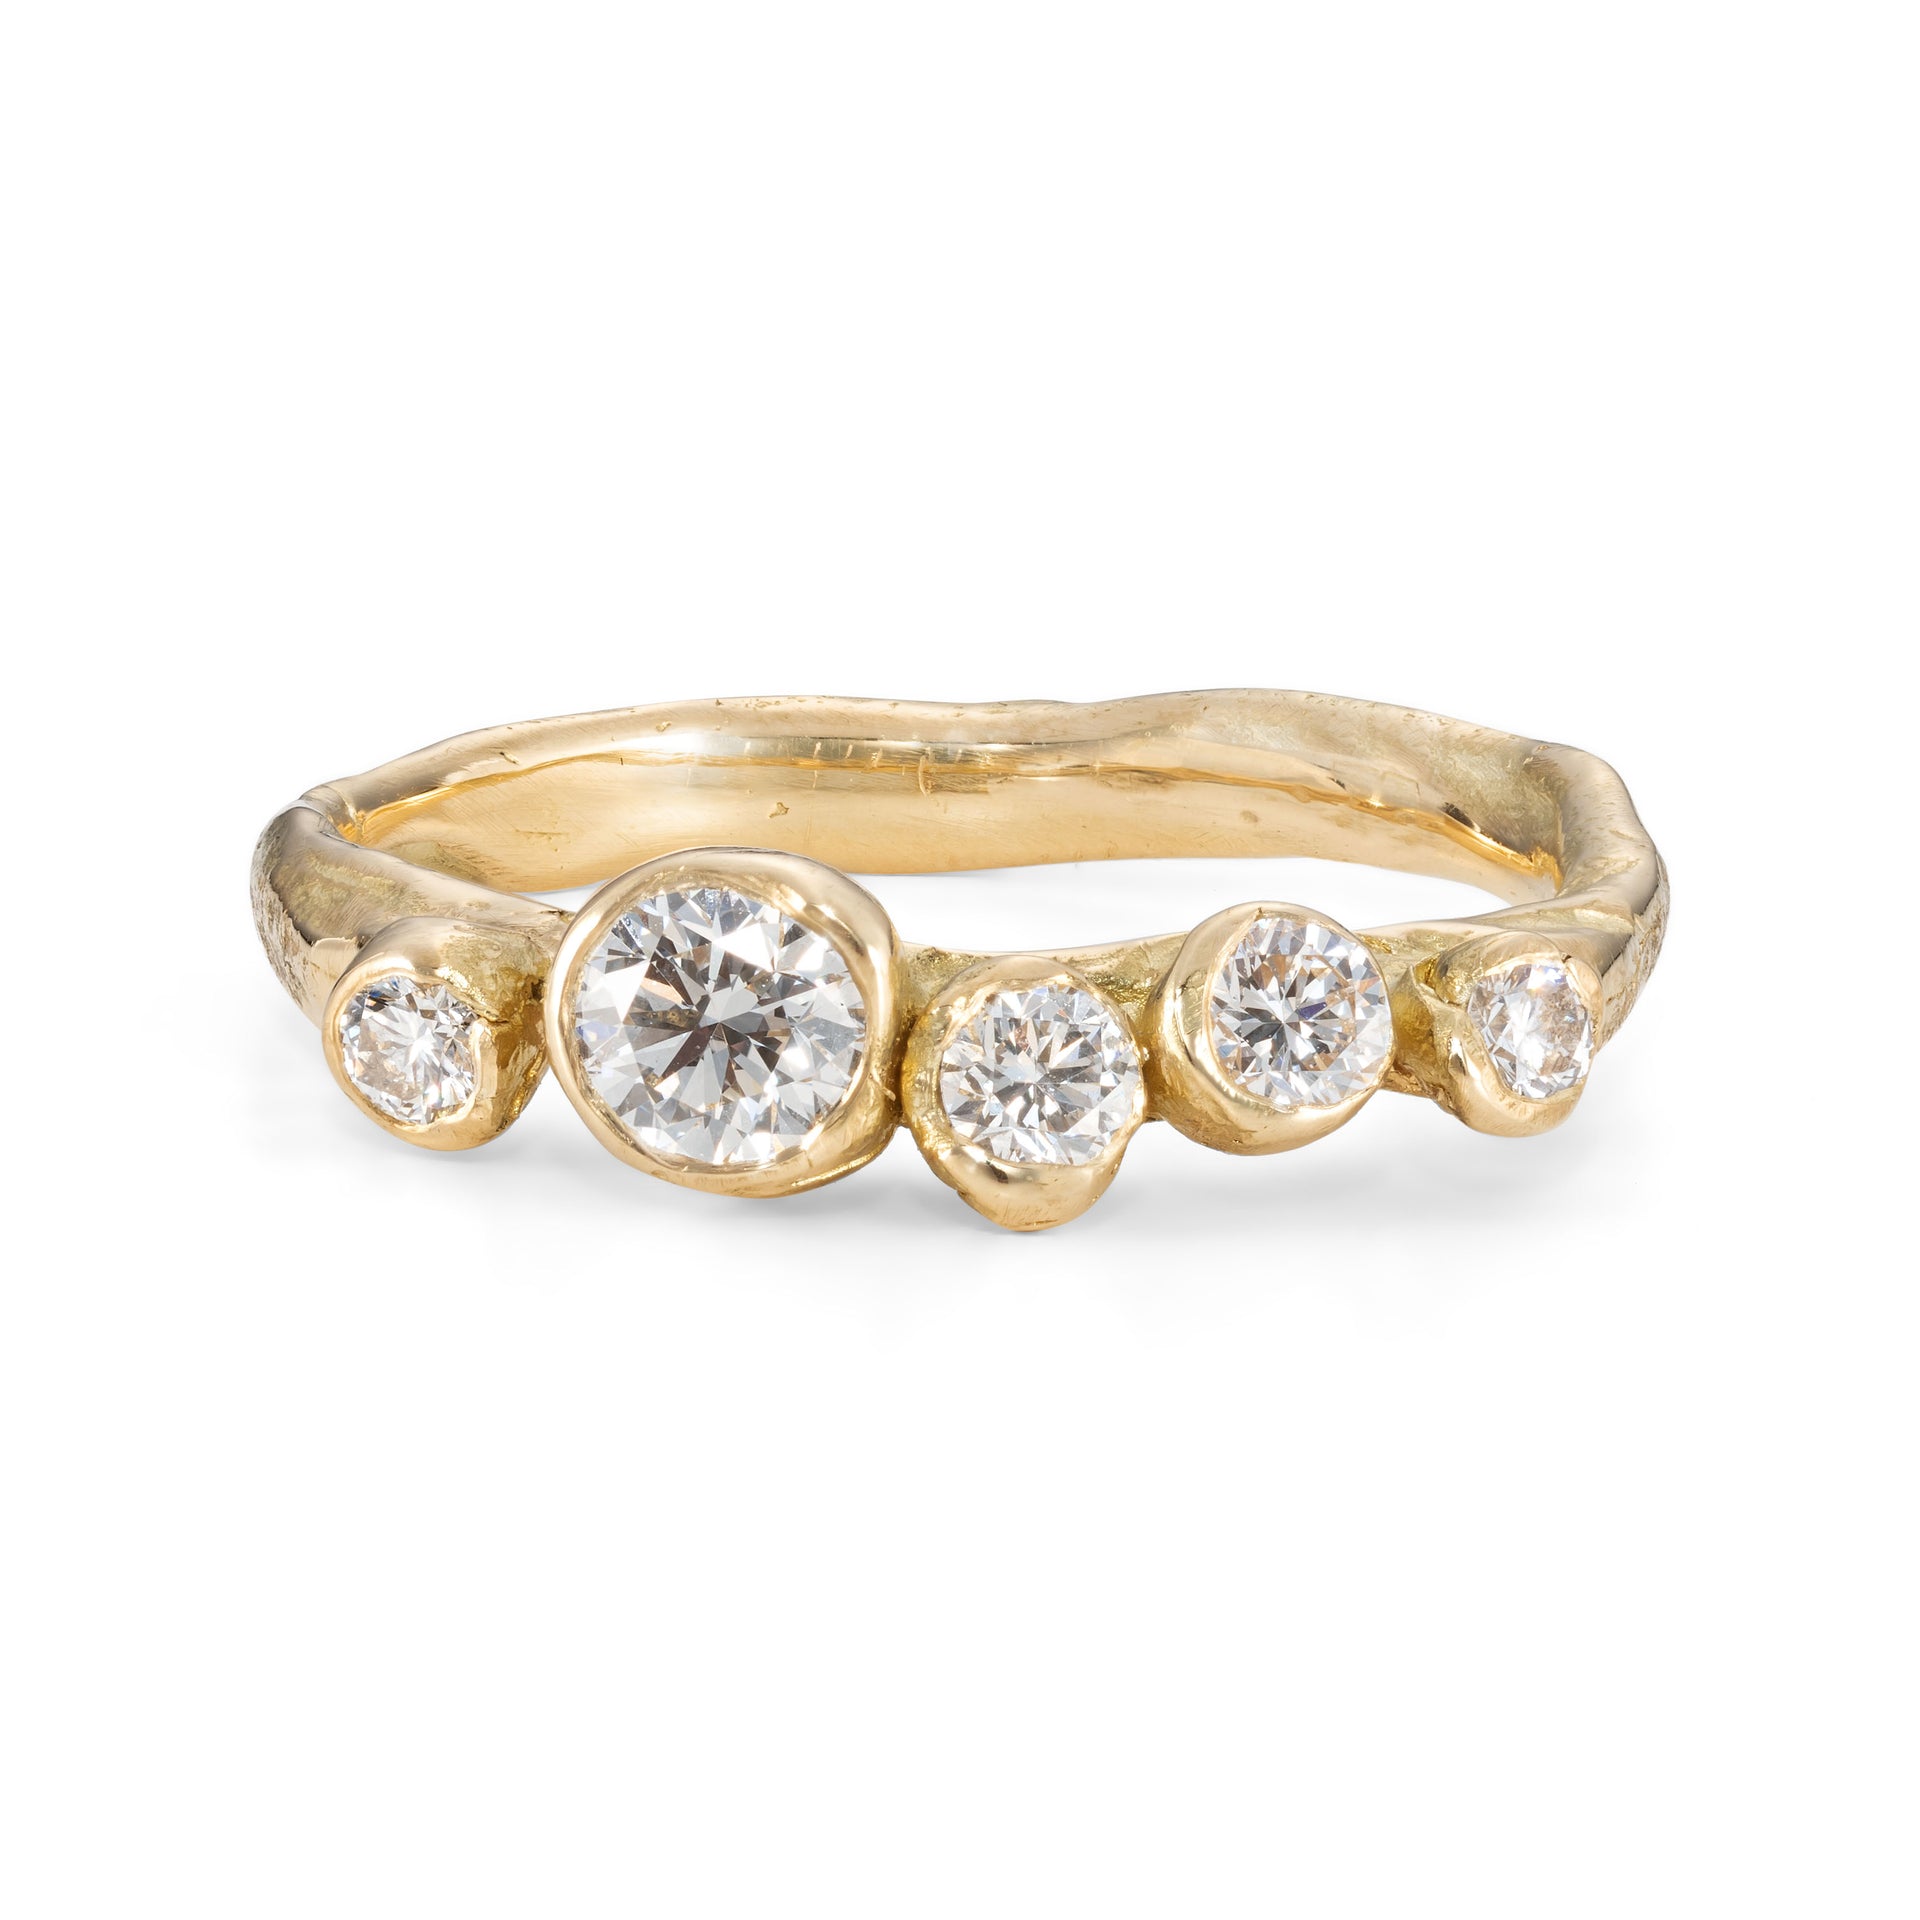 Alternative 18ct gold engagement ring, set with 5 ethically sourced diamonds. This ring has been designed and created by Emily Nixon in Cornwall.